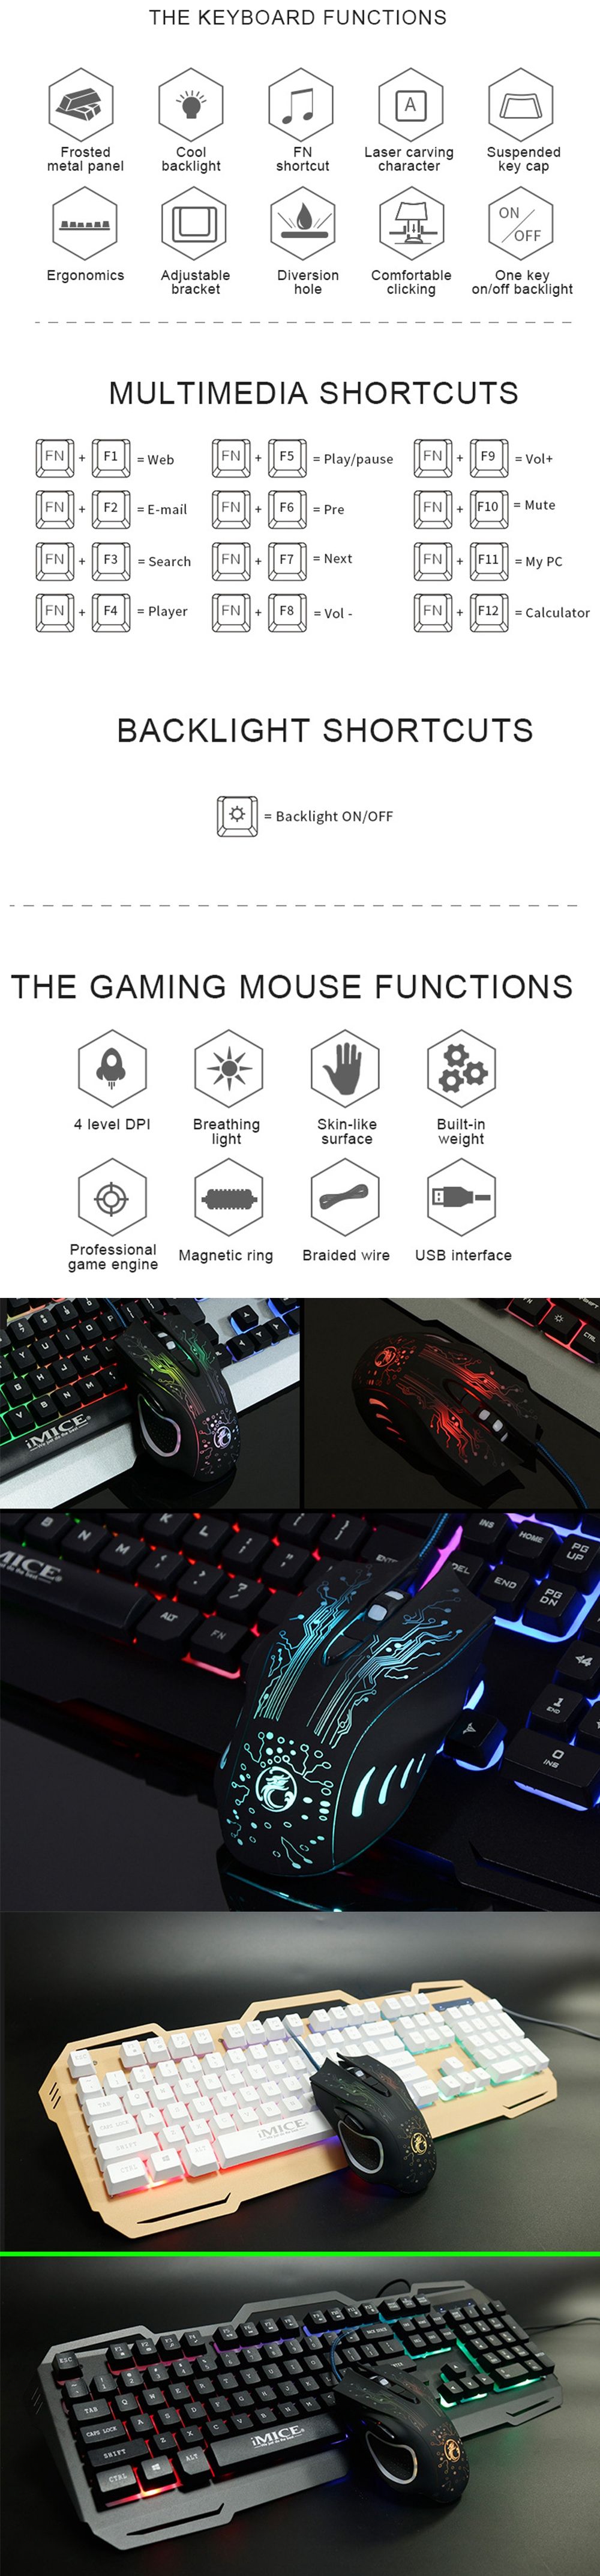 IMICE-KM-690-USB-Wired-Gaming-Keyboard-3-Color-LED-Backlit-2400DPI-Gaming-Mouse-Combo-1576421